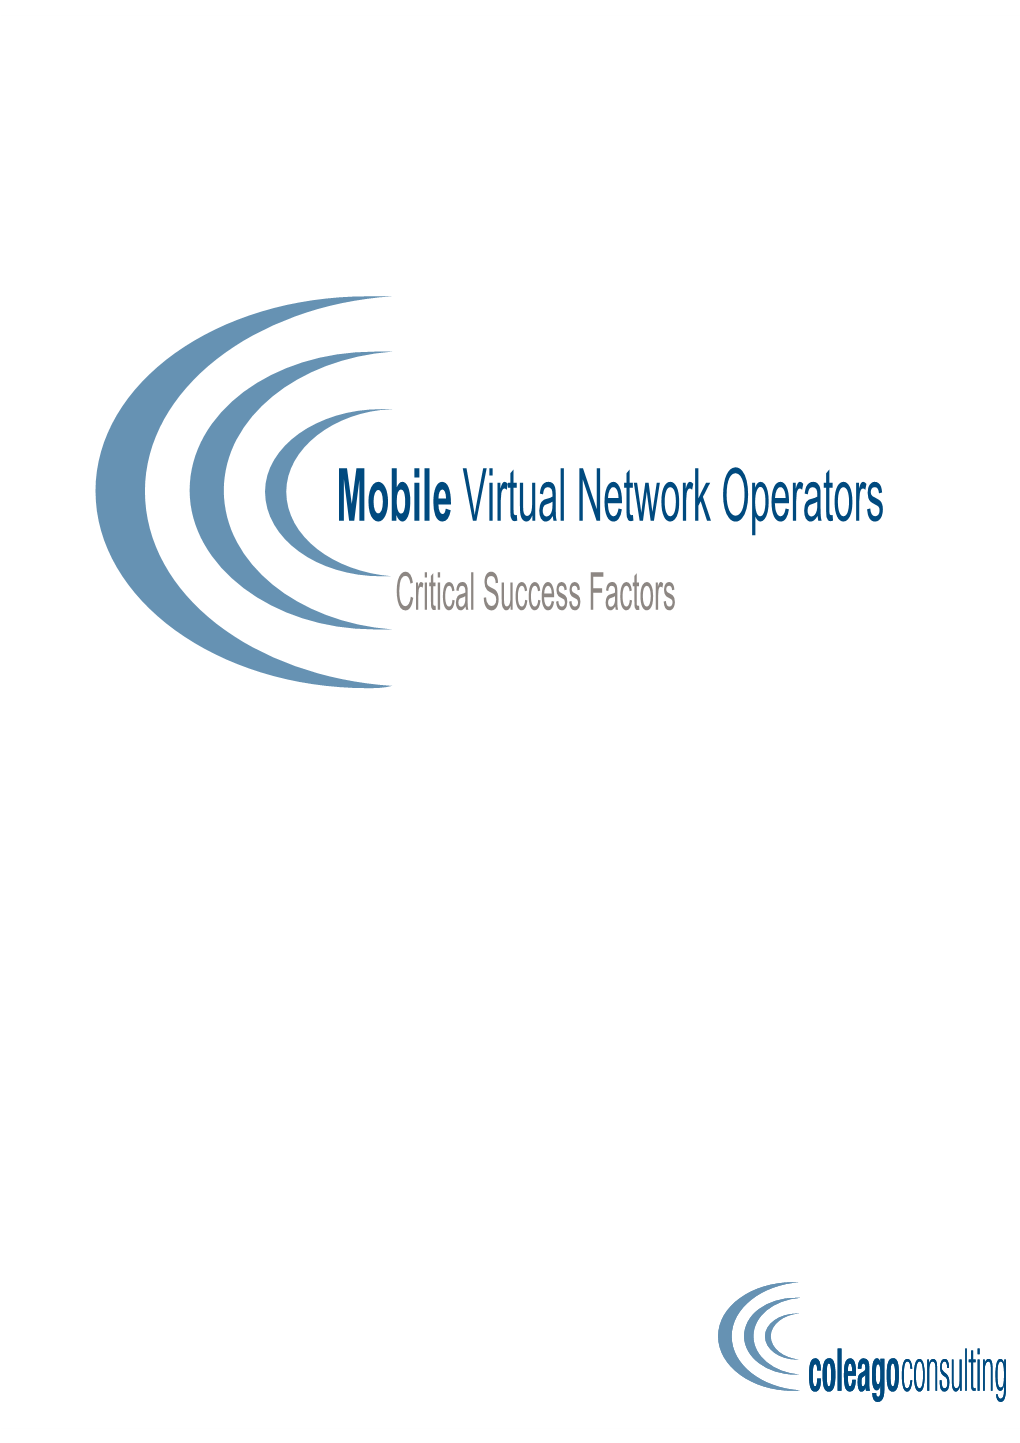 Mobile Virtual Network Operators Critical Success Factors Business Challenges and Objectives There Are Many Challenges in Launching a Successful MVNO